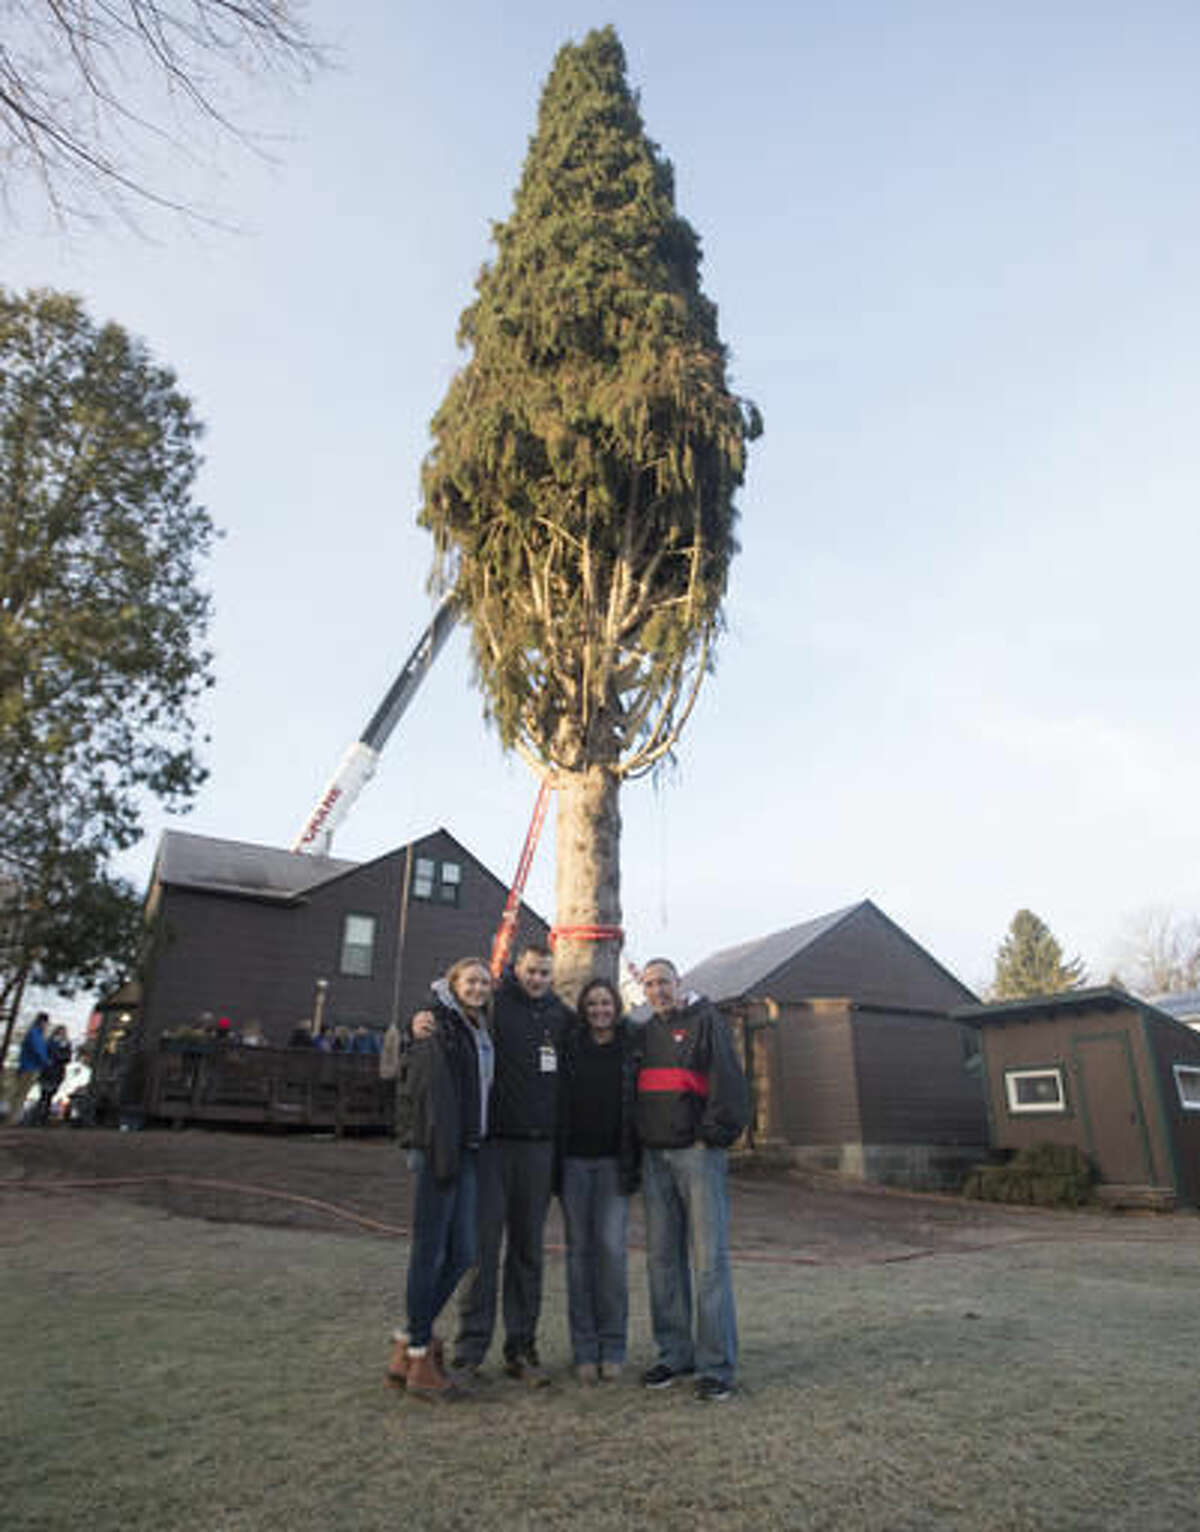 Graig Eichler, right, his wife Angie and their children Ava and Brock pose in front of a 94-foot Norway spruce that will serve as the Christmas tree at Rockefeller Center on Thursday, Nov. 10, 2016, in Oneonta, N.Y. The spruce is due to arrive Saturday in Manhattan, about 140 miles away. (AP Photo/Mike Groll)